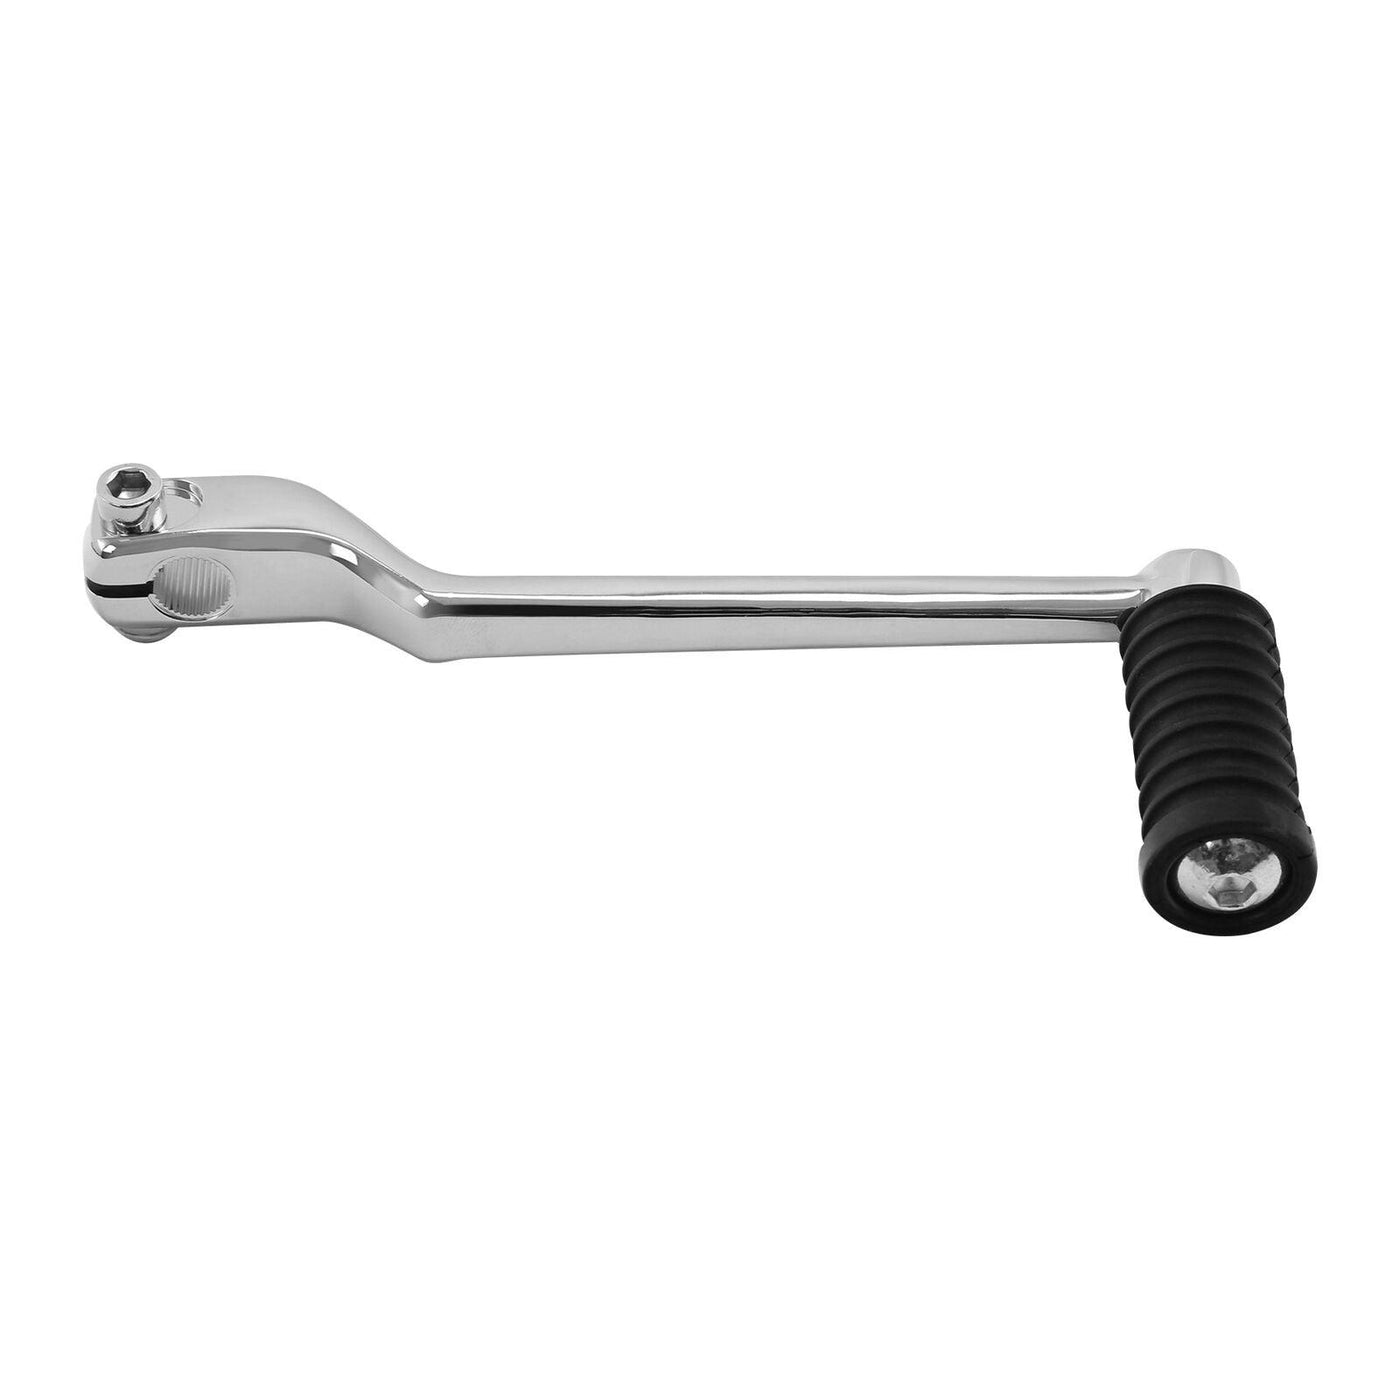 Left Heel Toe Shift Shifter Lever For Harley Touring Electra Road Glide 88-22 US - Moto Life Products